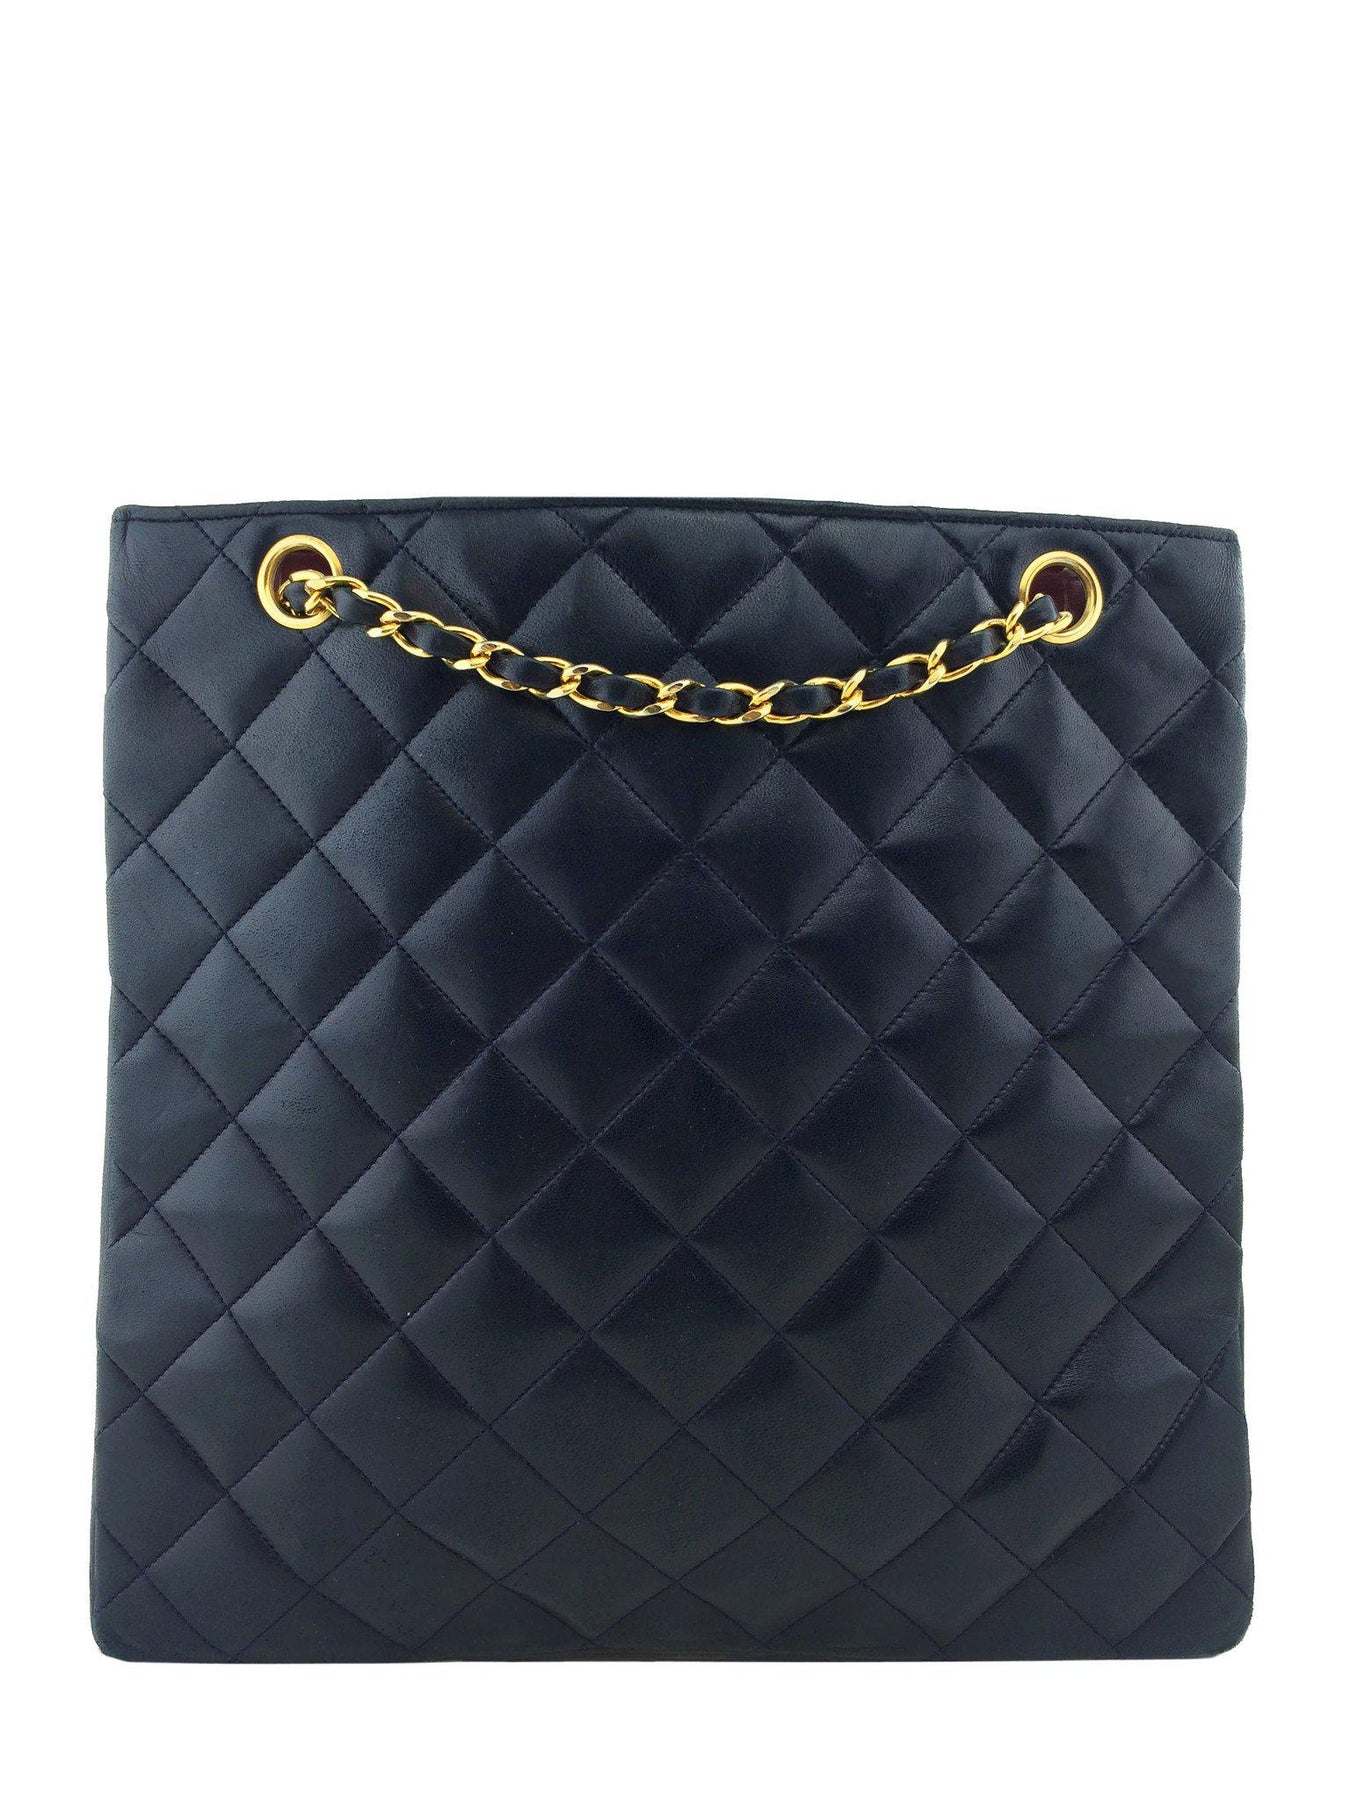 Chanel Quilted Down Tote Reversible Handbag